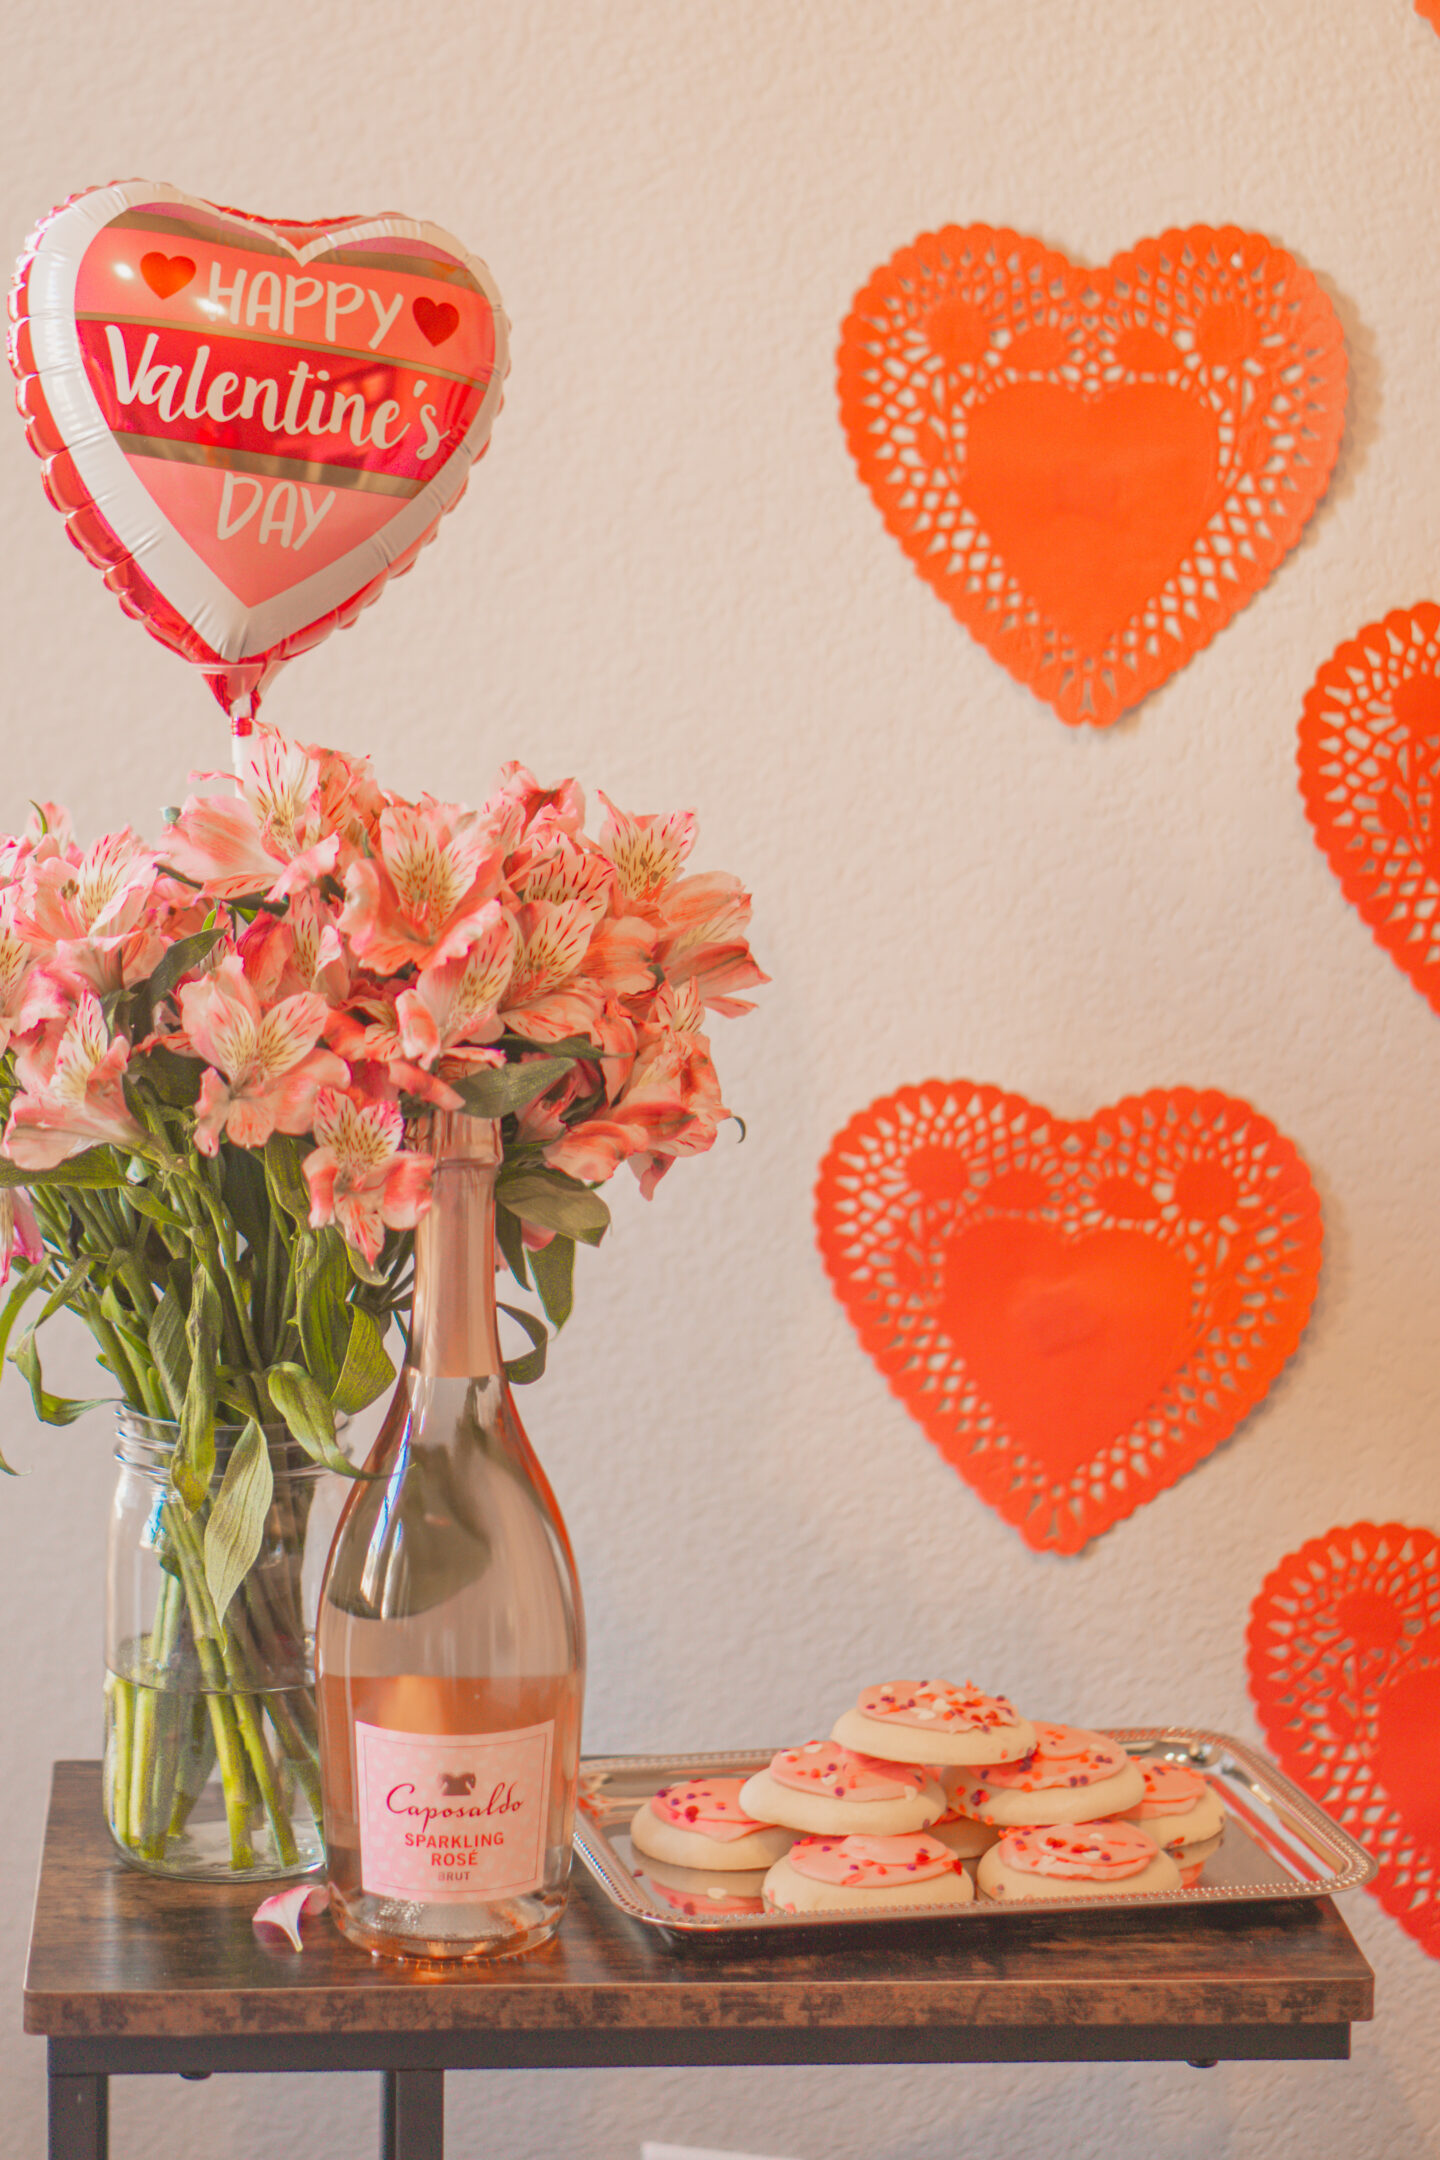 How to Host the Perfect Galentine's Day Party, Valentine's Day cocktail ideas  - Palm Trees and Pellegrino San Diego blogger